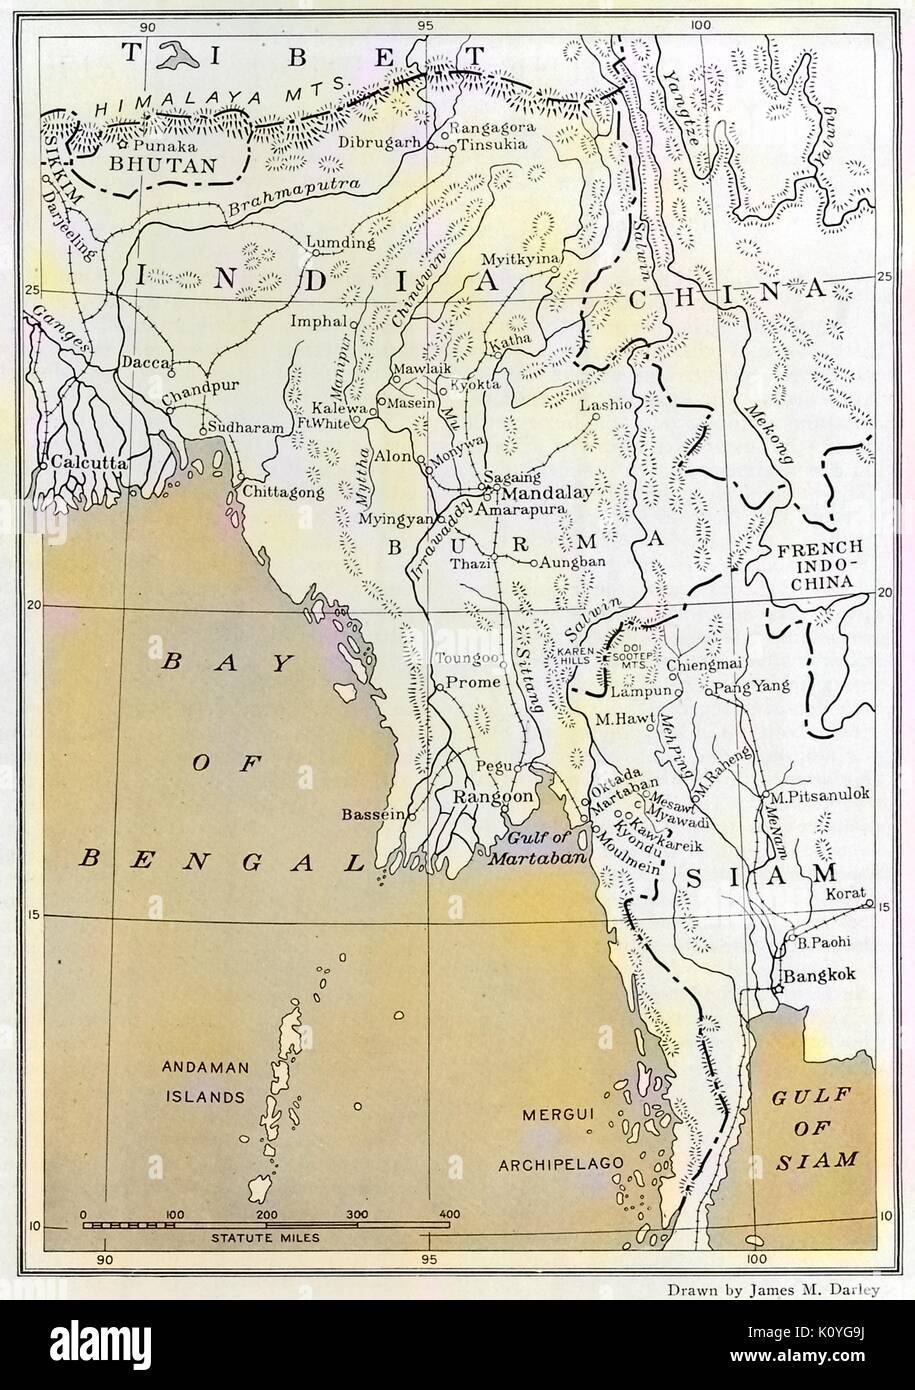 Map of Burma (now Myanmar), the Bay of Bengal, Siam (now Thailand), India, China, Tibet, and other areas of Southeast Asia, China, 1922. Note: Image has been digitally colorized using a modern process. Colors may not be period-accurate. Stock Photo